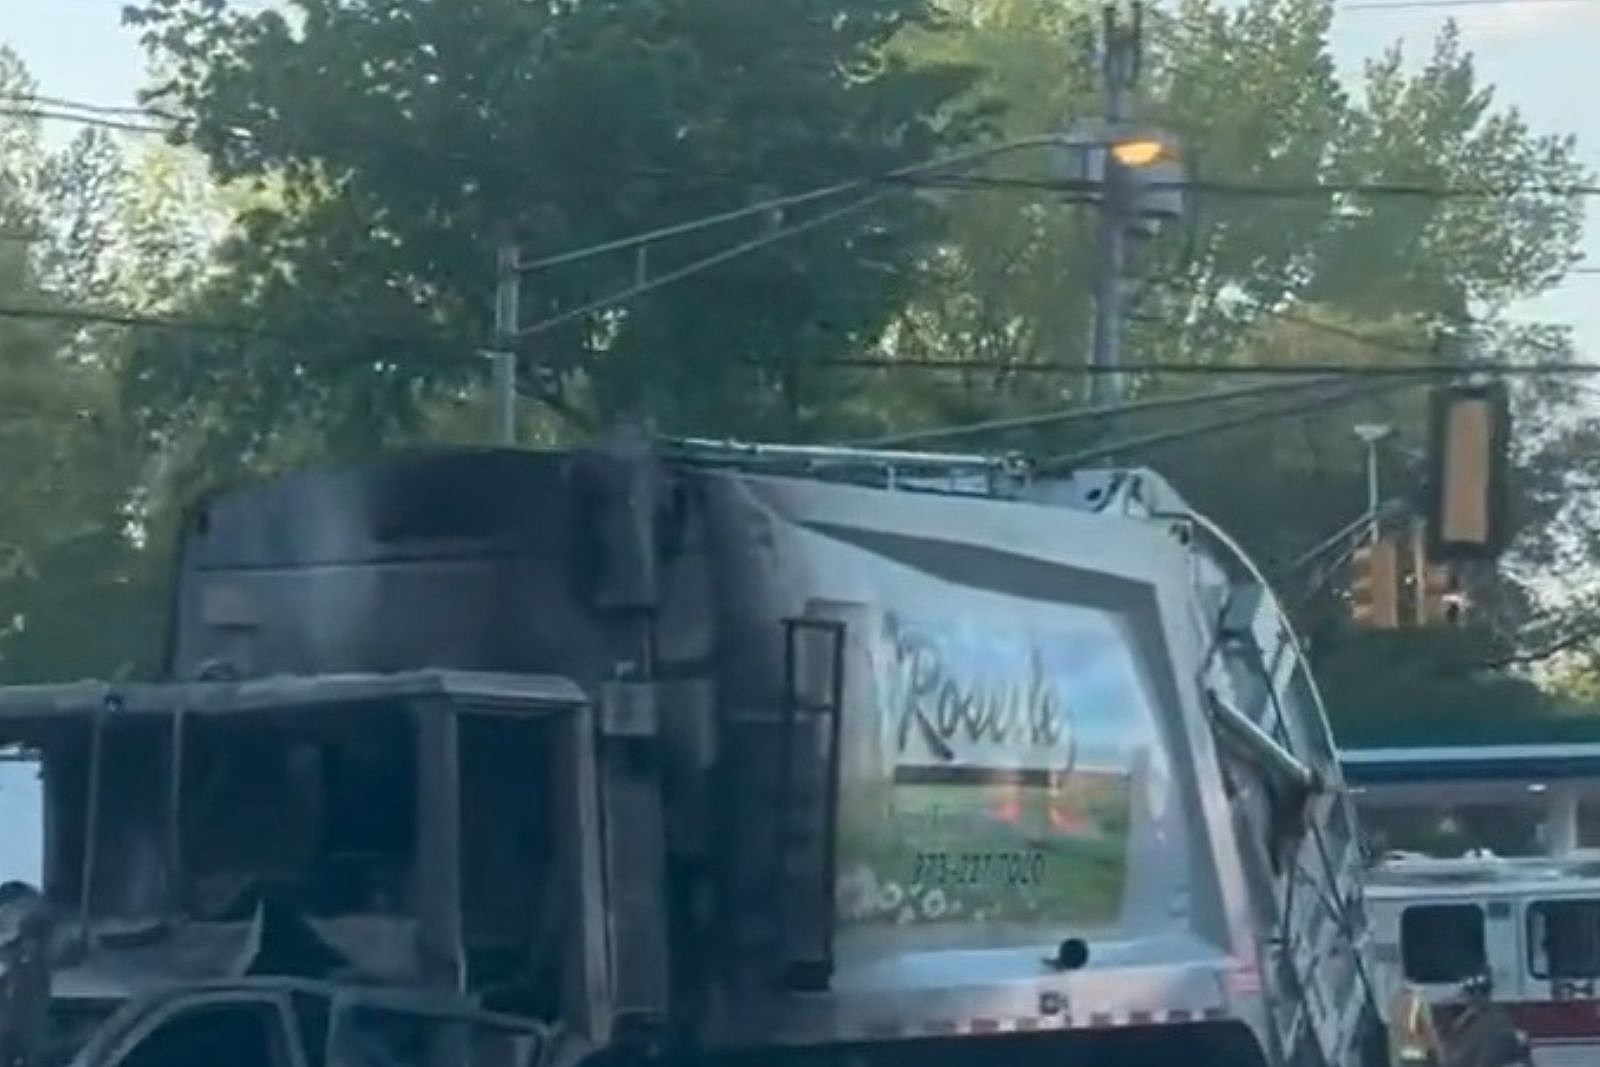 Driver charged in fatal garbage truck crash was on phone — cops